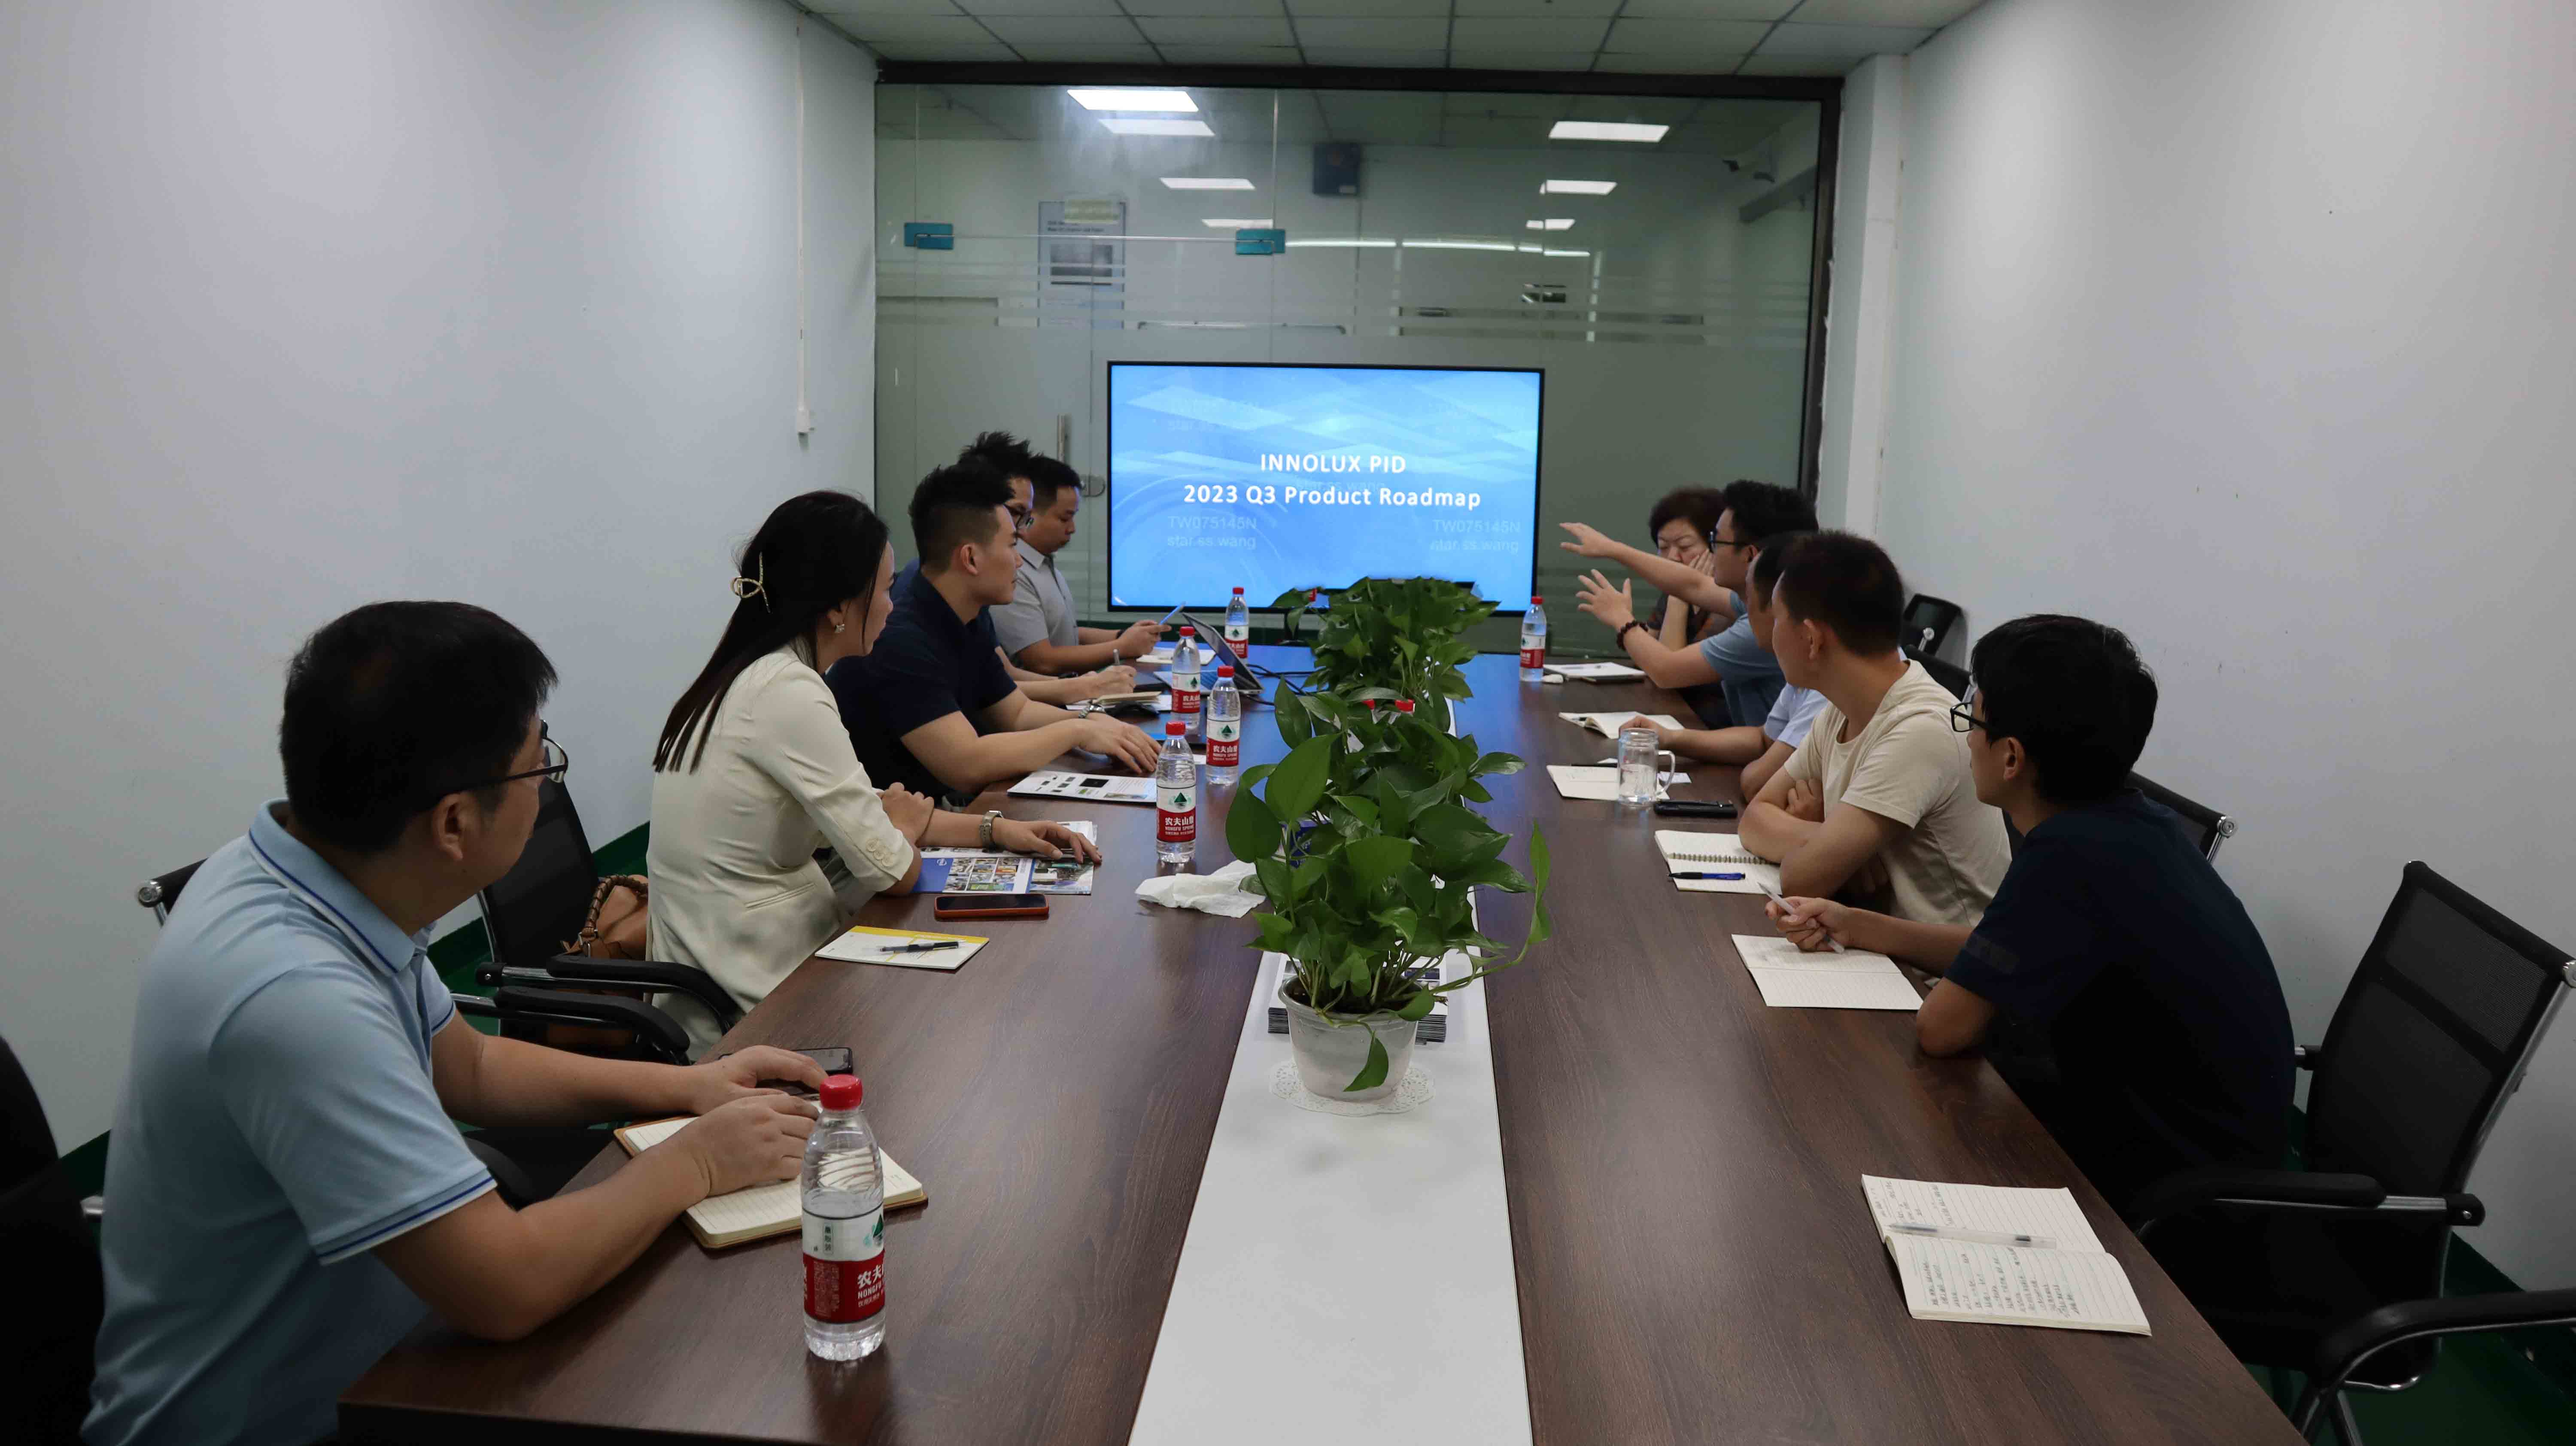 Warmly welcome the visit of Innolux - interactive sharing, win-win cooperation!